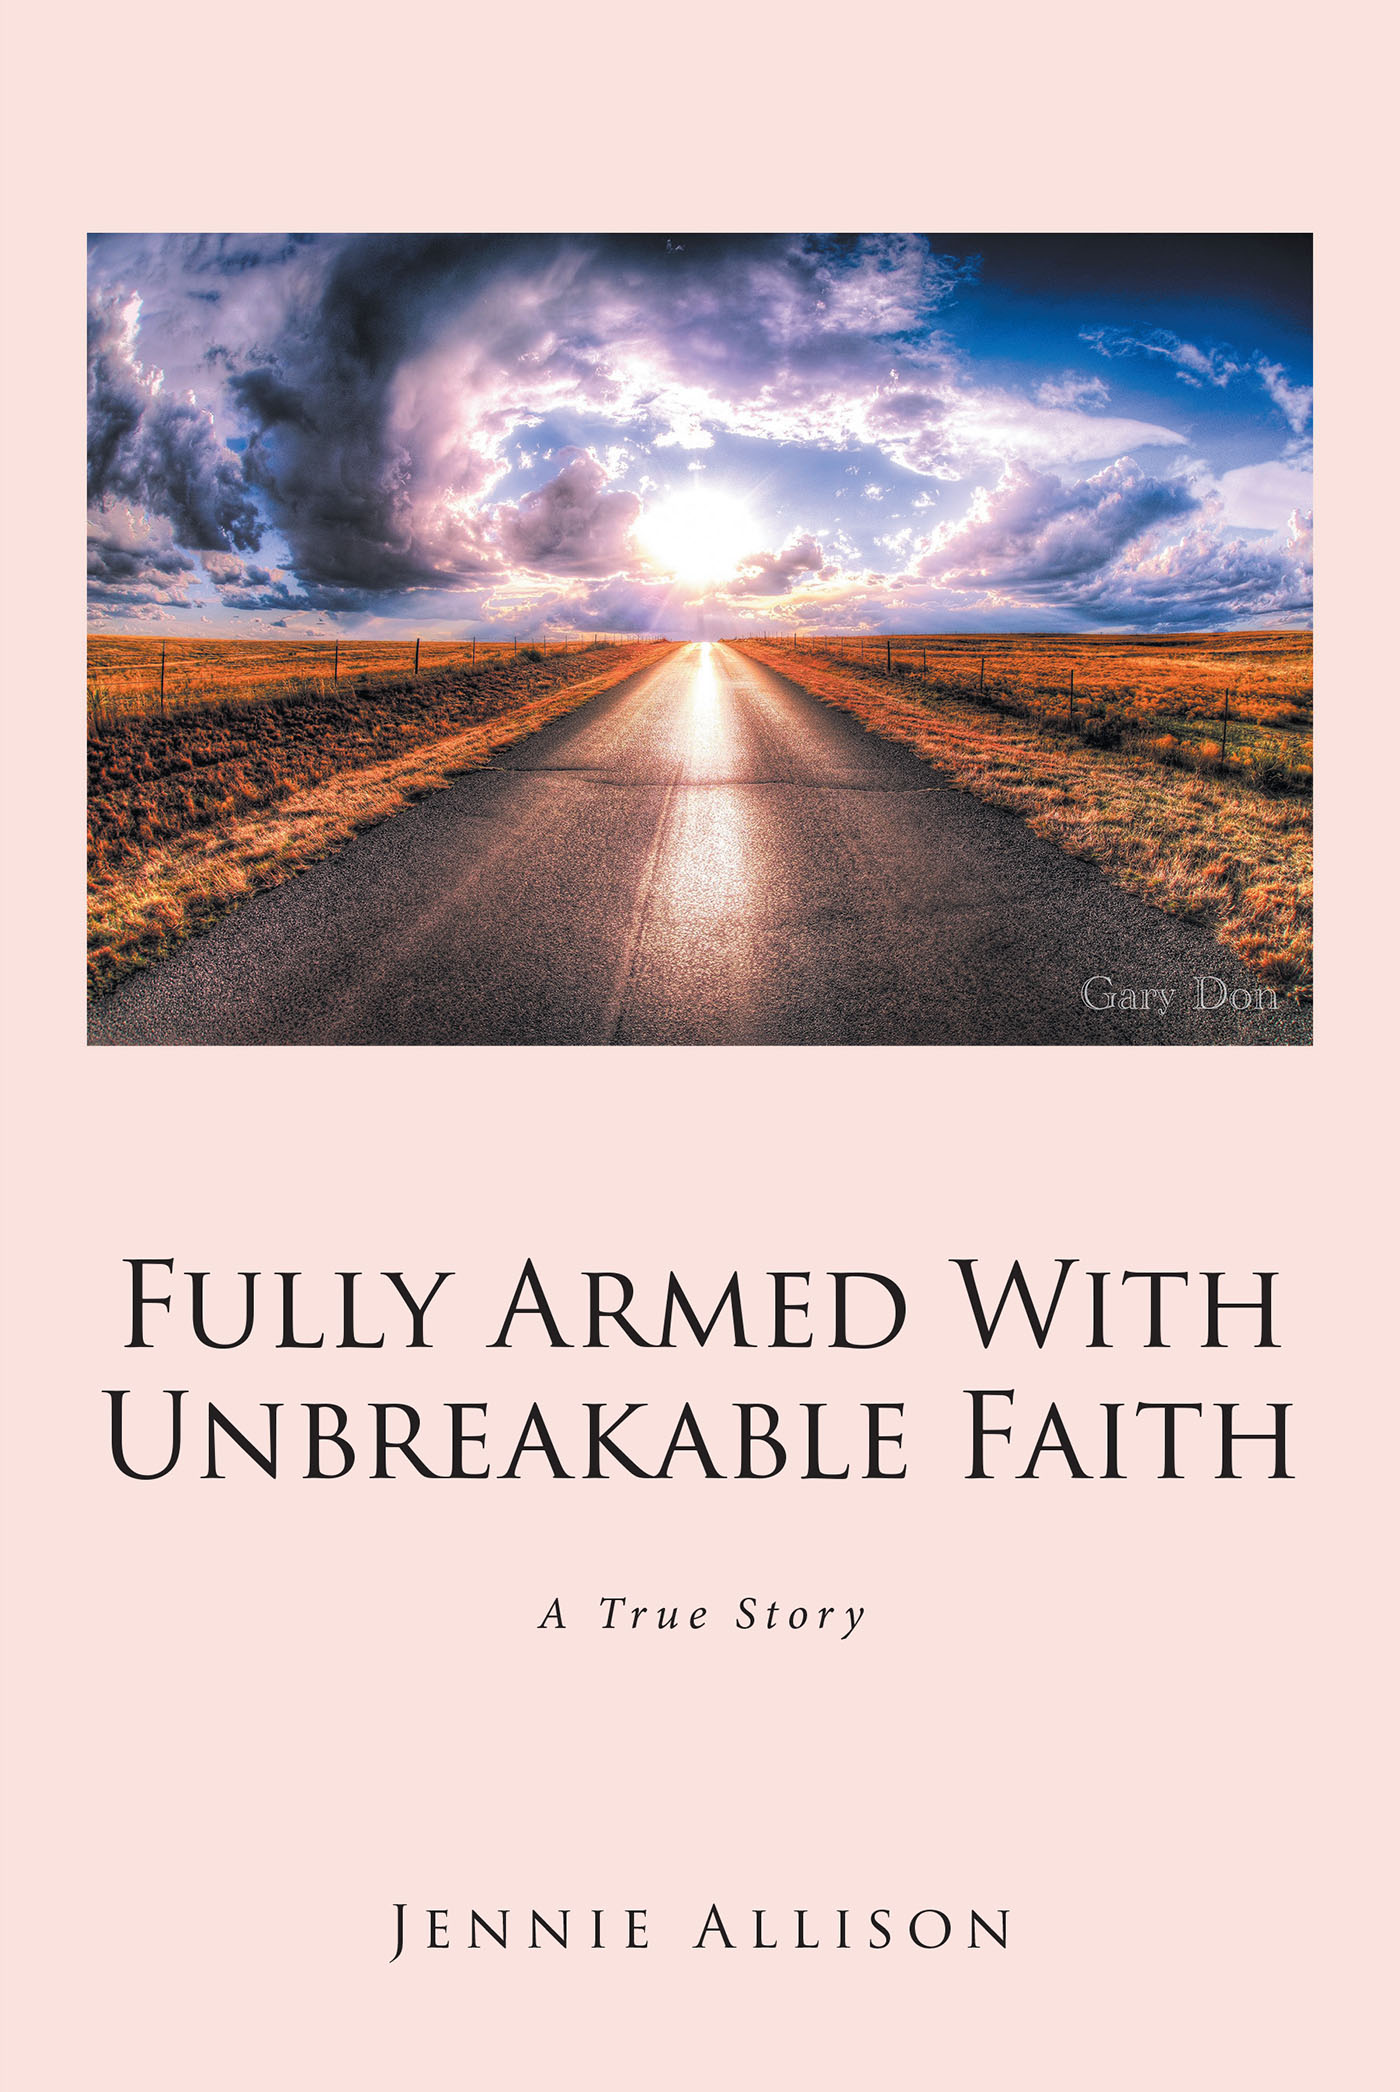 Jennie Allison’s New Book, "Fully Armed with Unbreakable Faith," Reveals How the Author's Relationship with God Provided Her the Ability to Conquer Life's Challenges